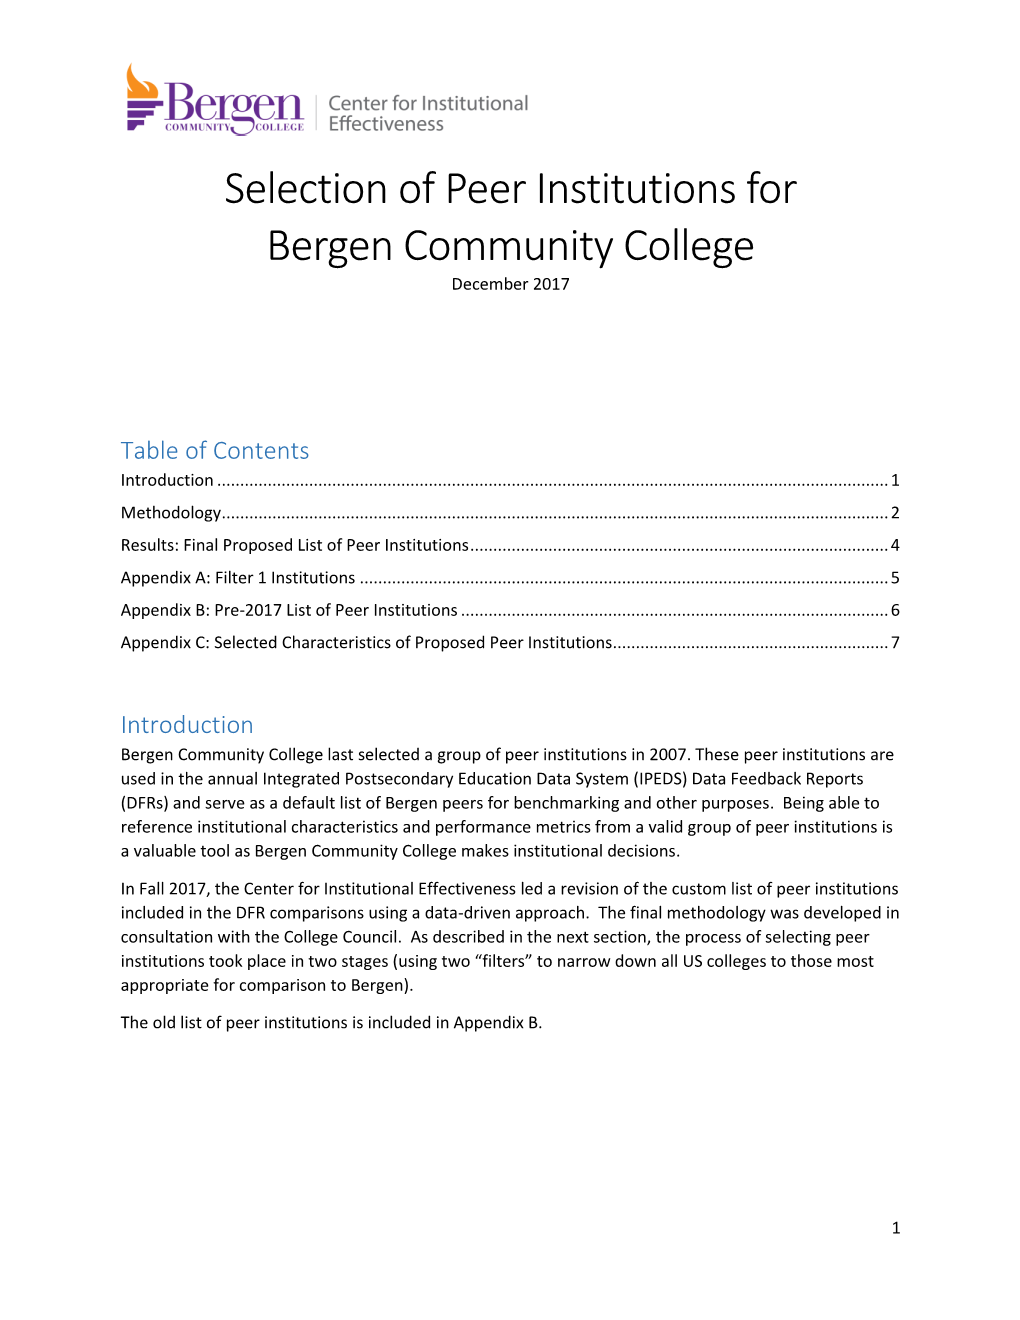 Selection of Peer Institutions for Bergen Community College December 2017